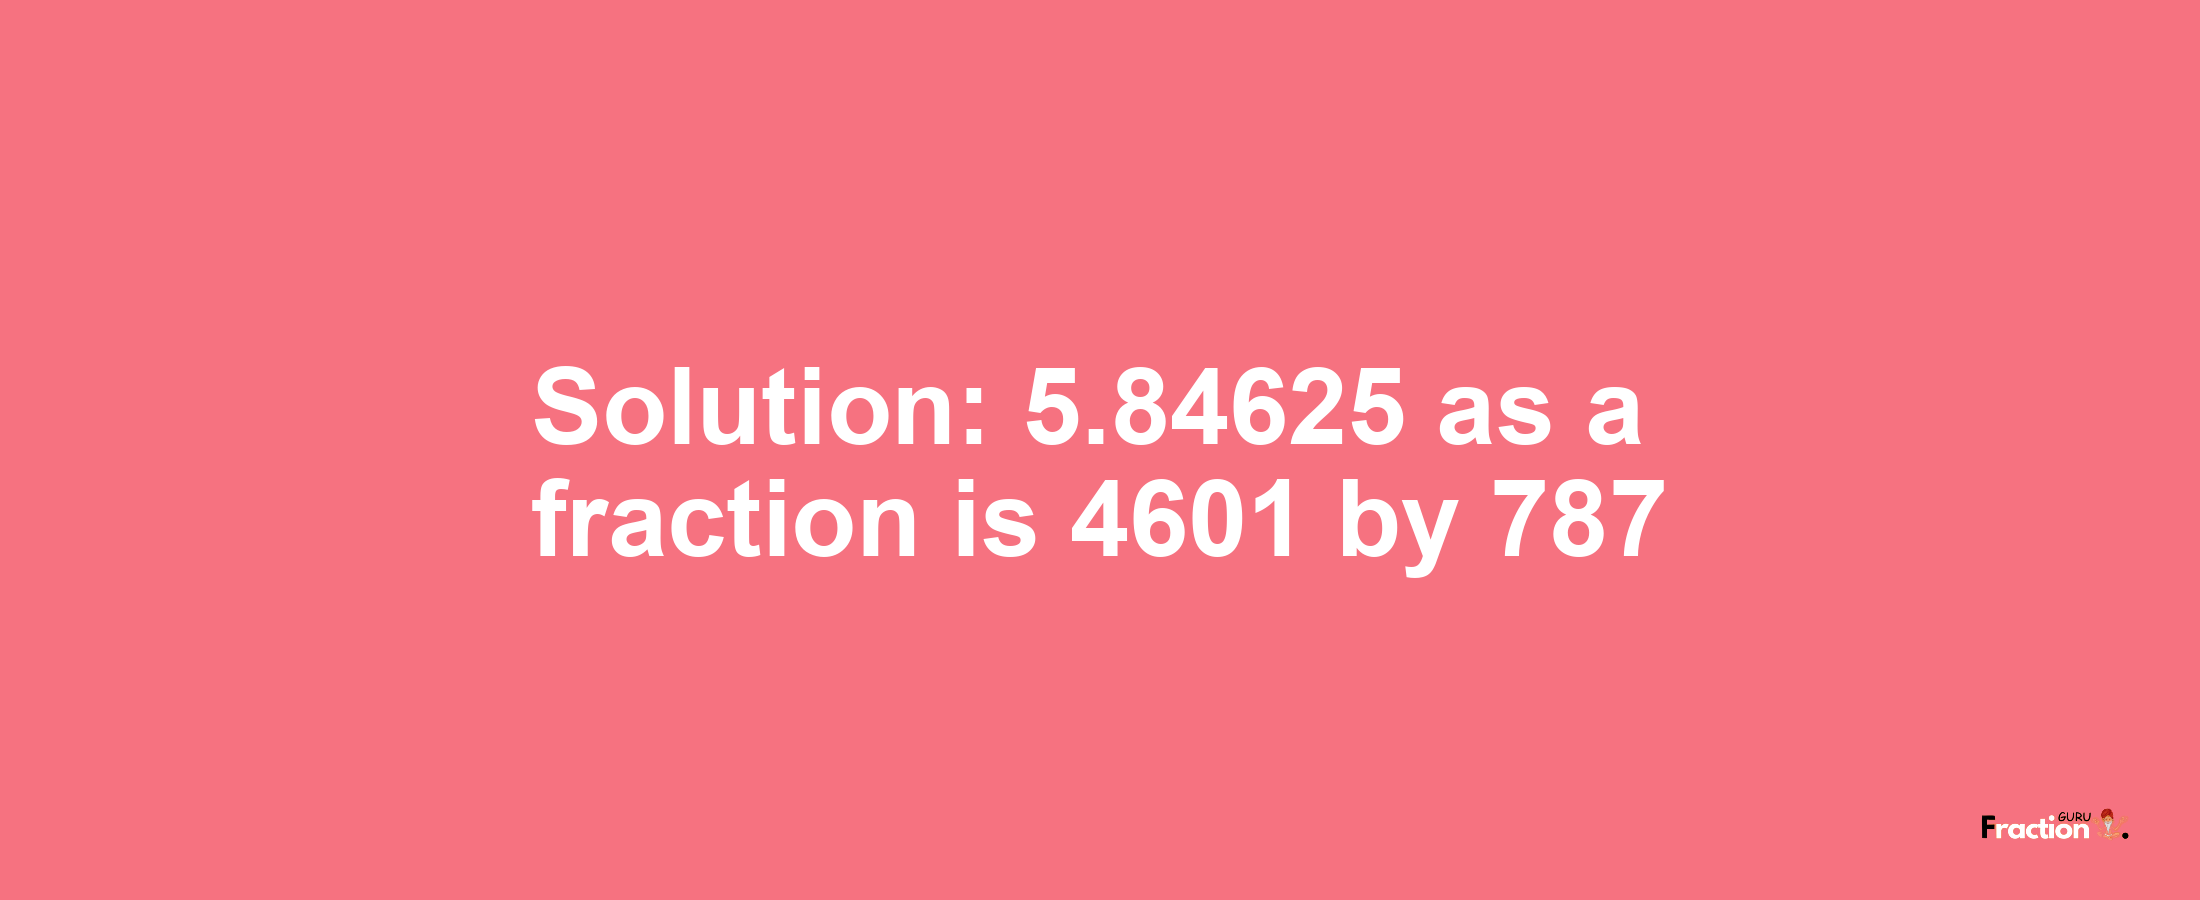 Solution:5.84625 as a fraction is 4601/787